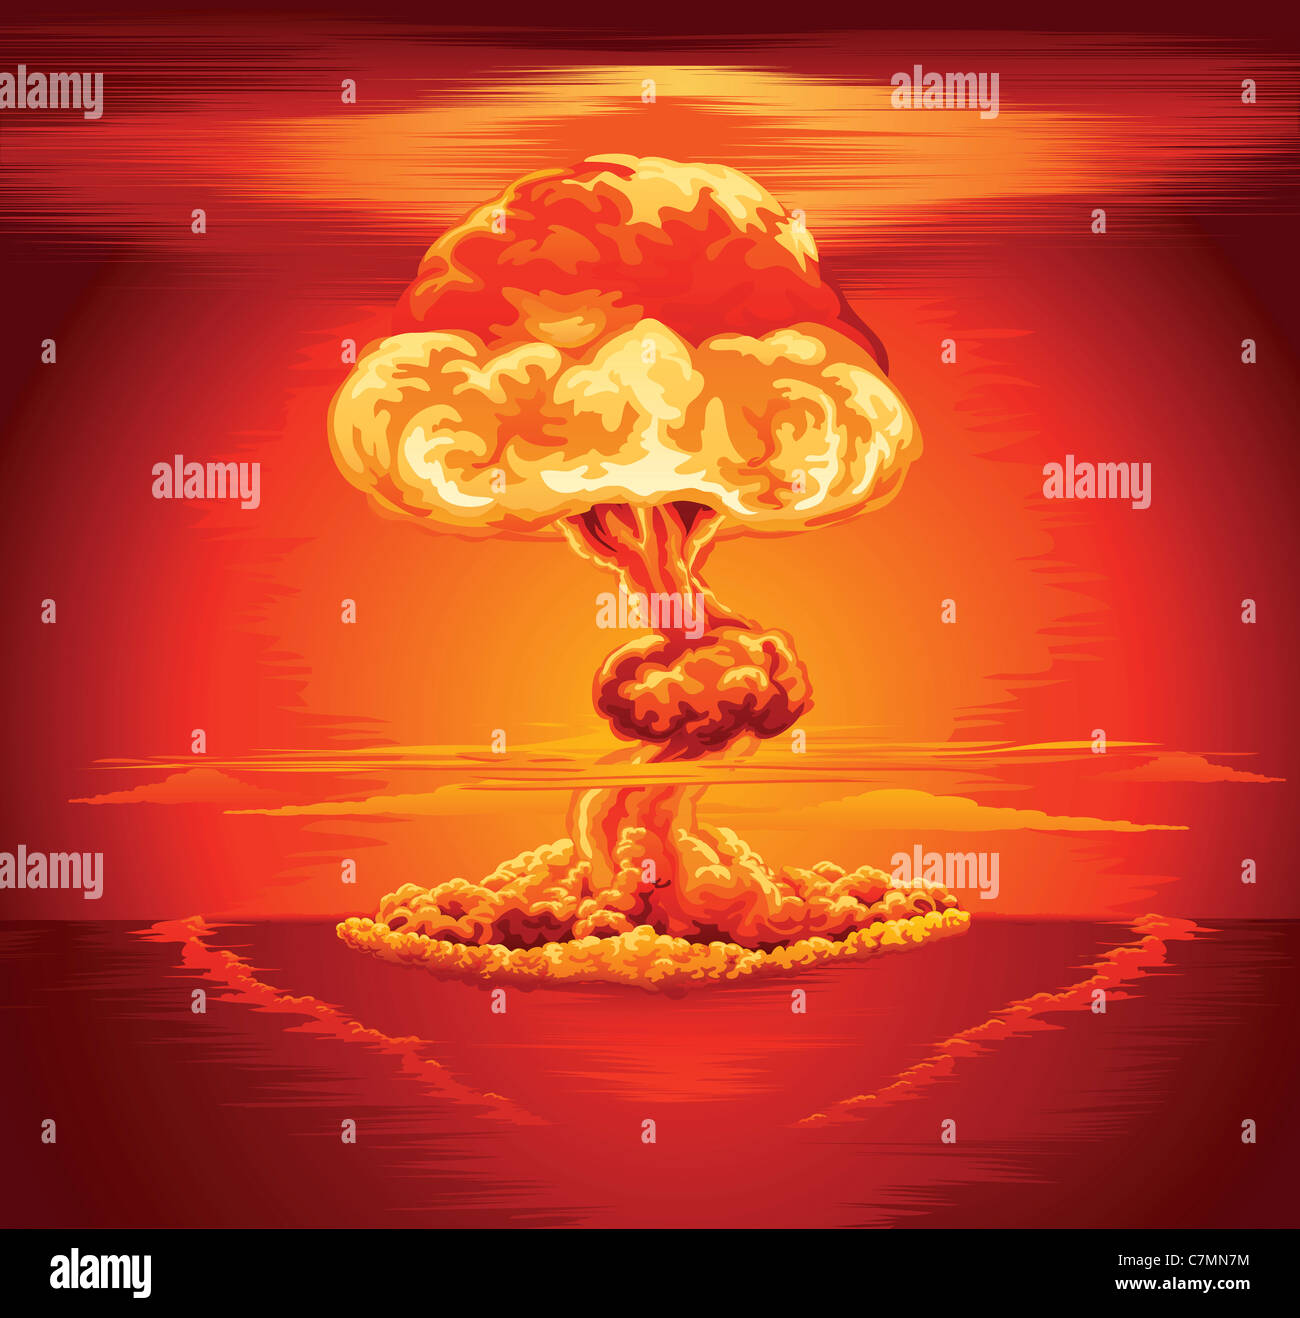 Illustration of a mushroom cloud following a nuclear explosion Stock Photo